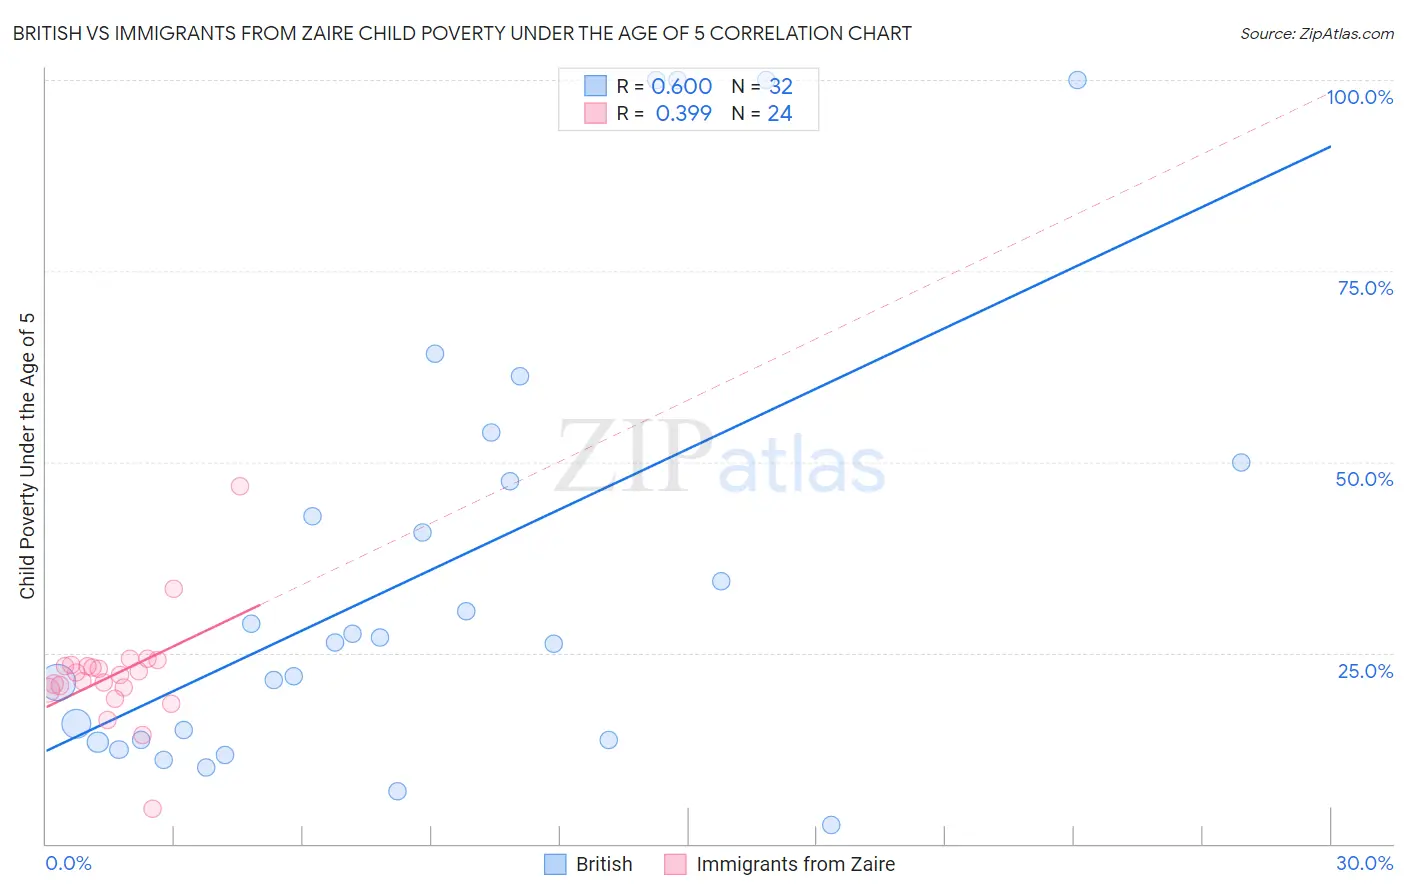 British vs Immigrants from Zaire Child Poverty Under the Age of 5